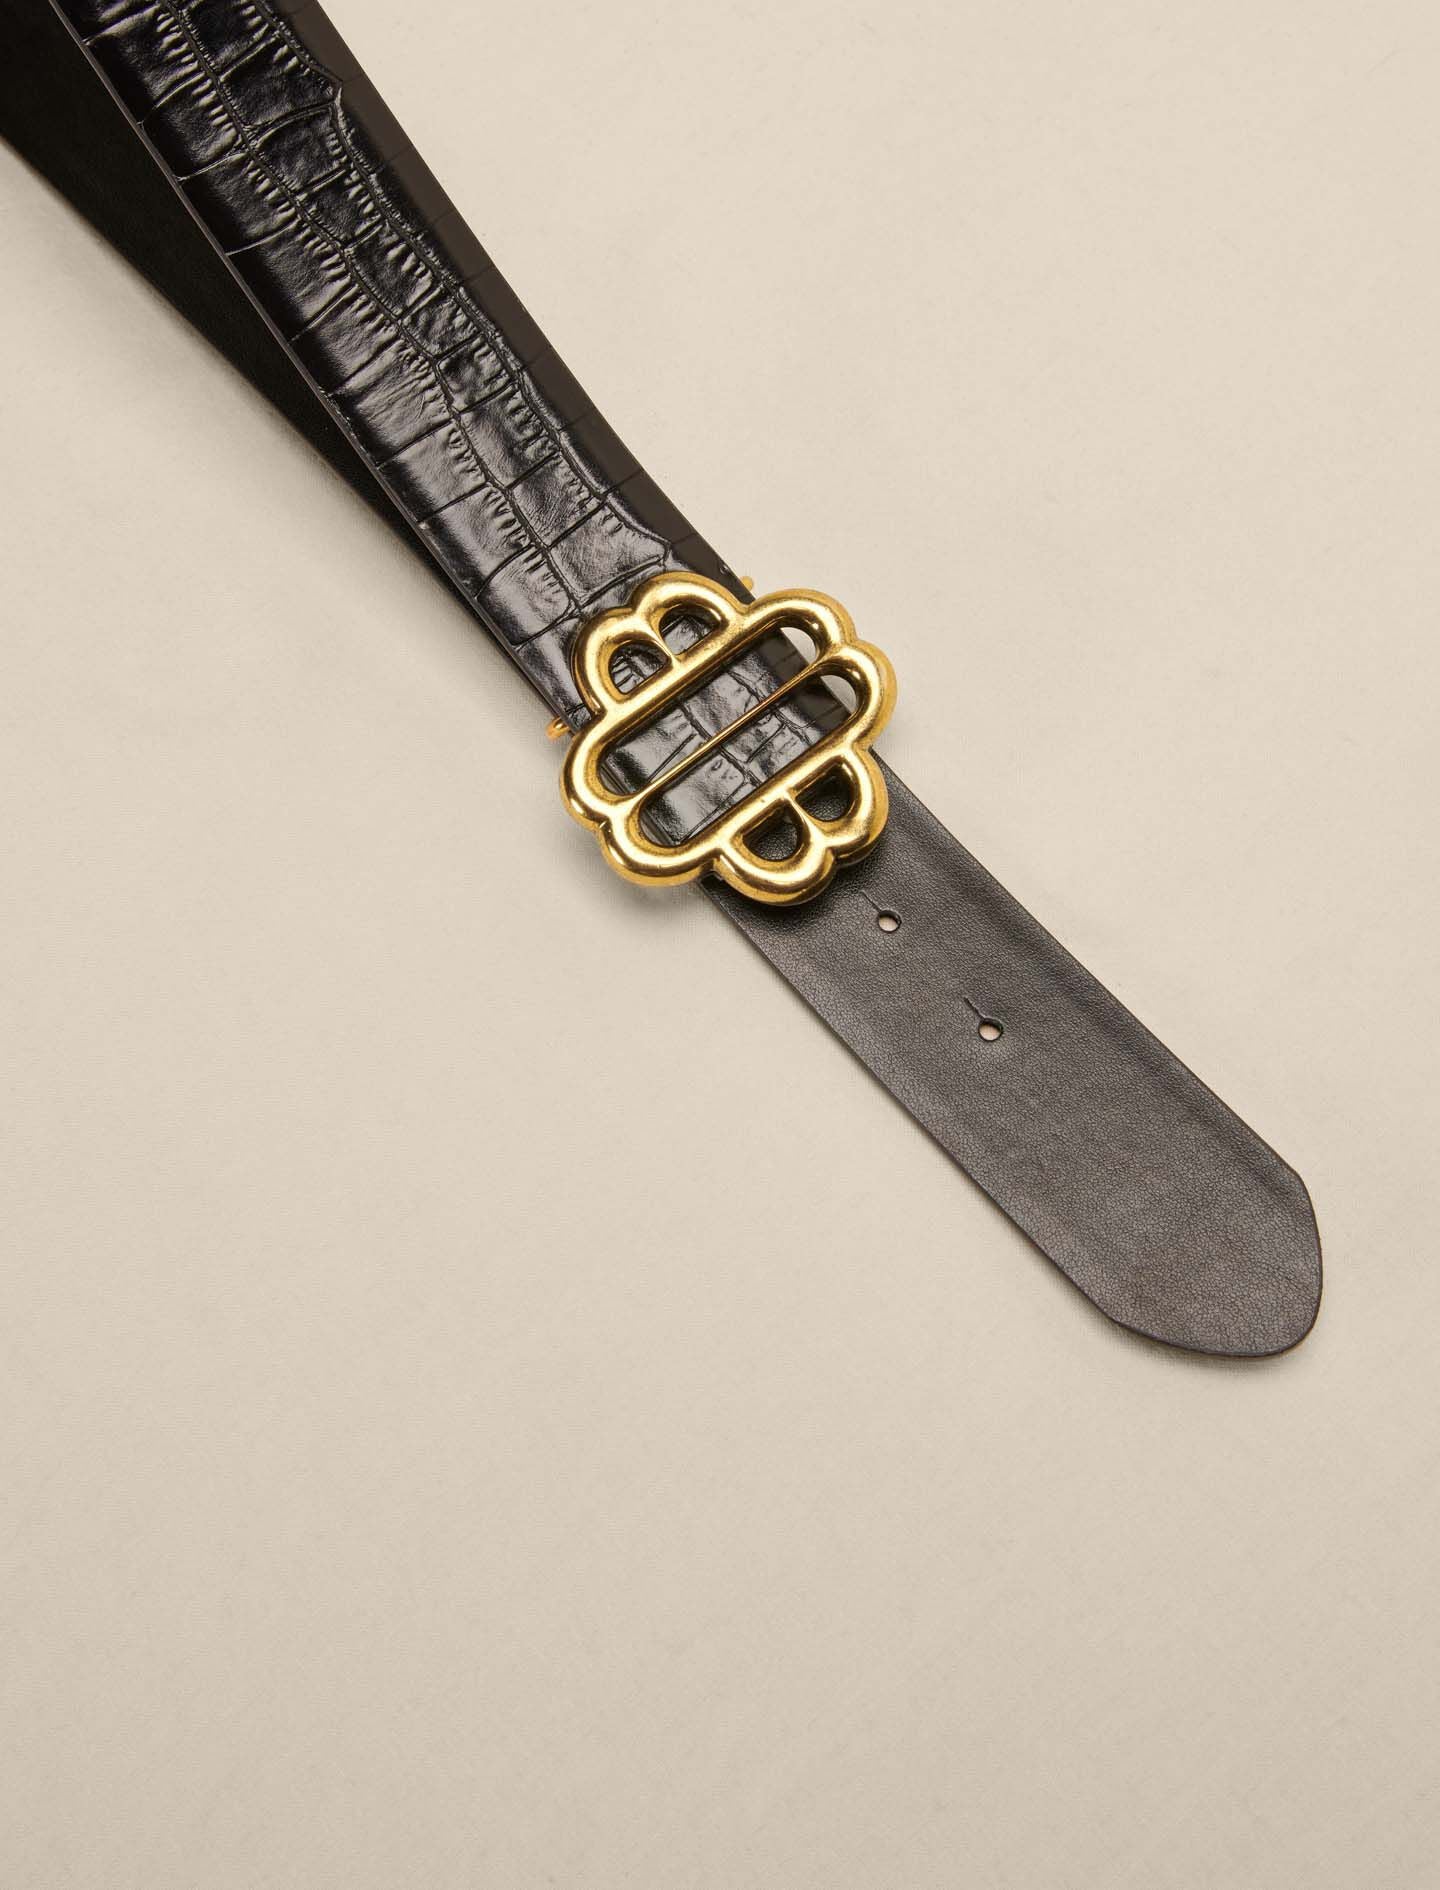 Black-leather belt with clover buckle